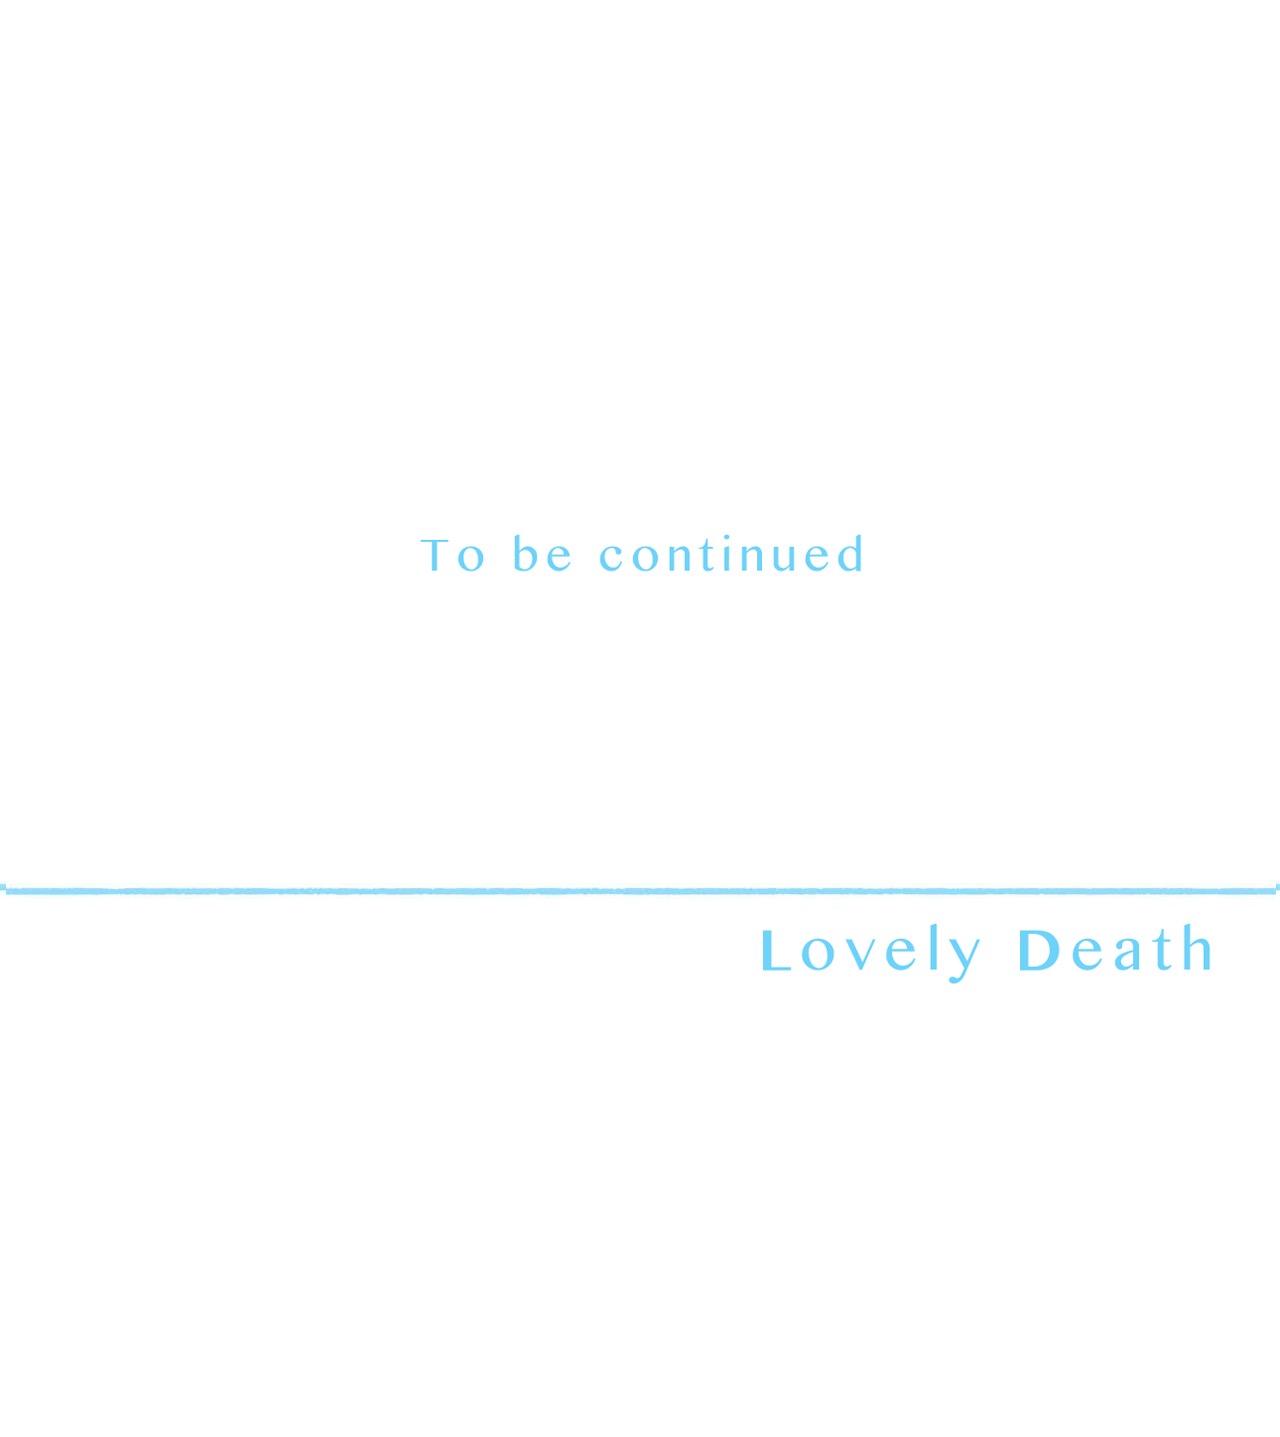 Lovely Death image